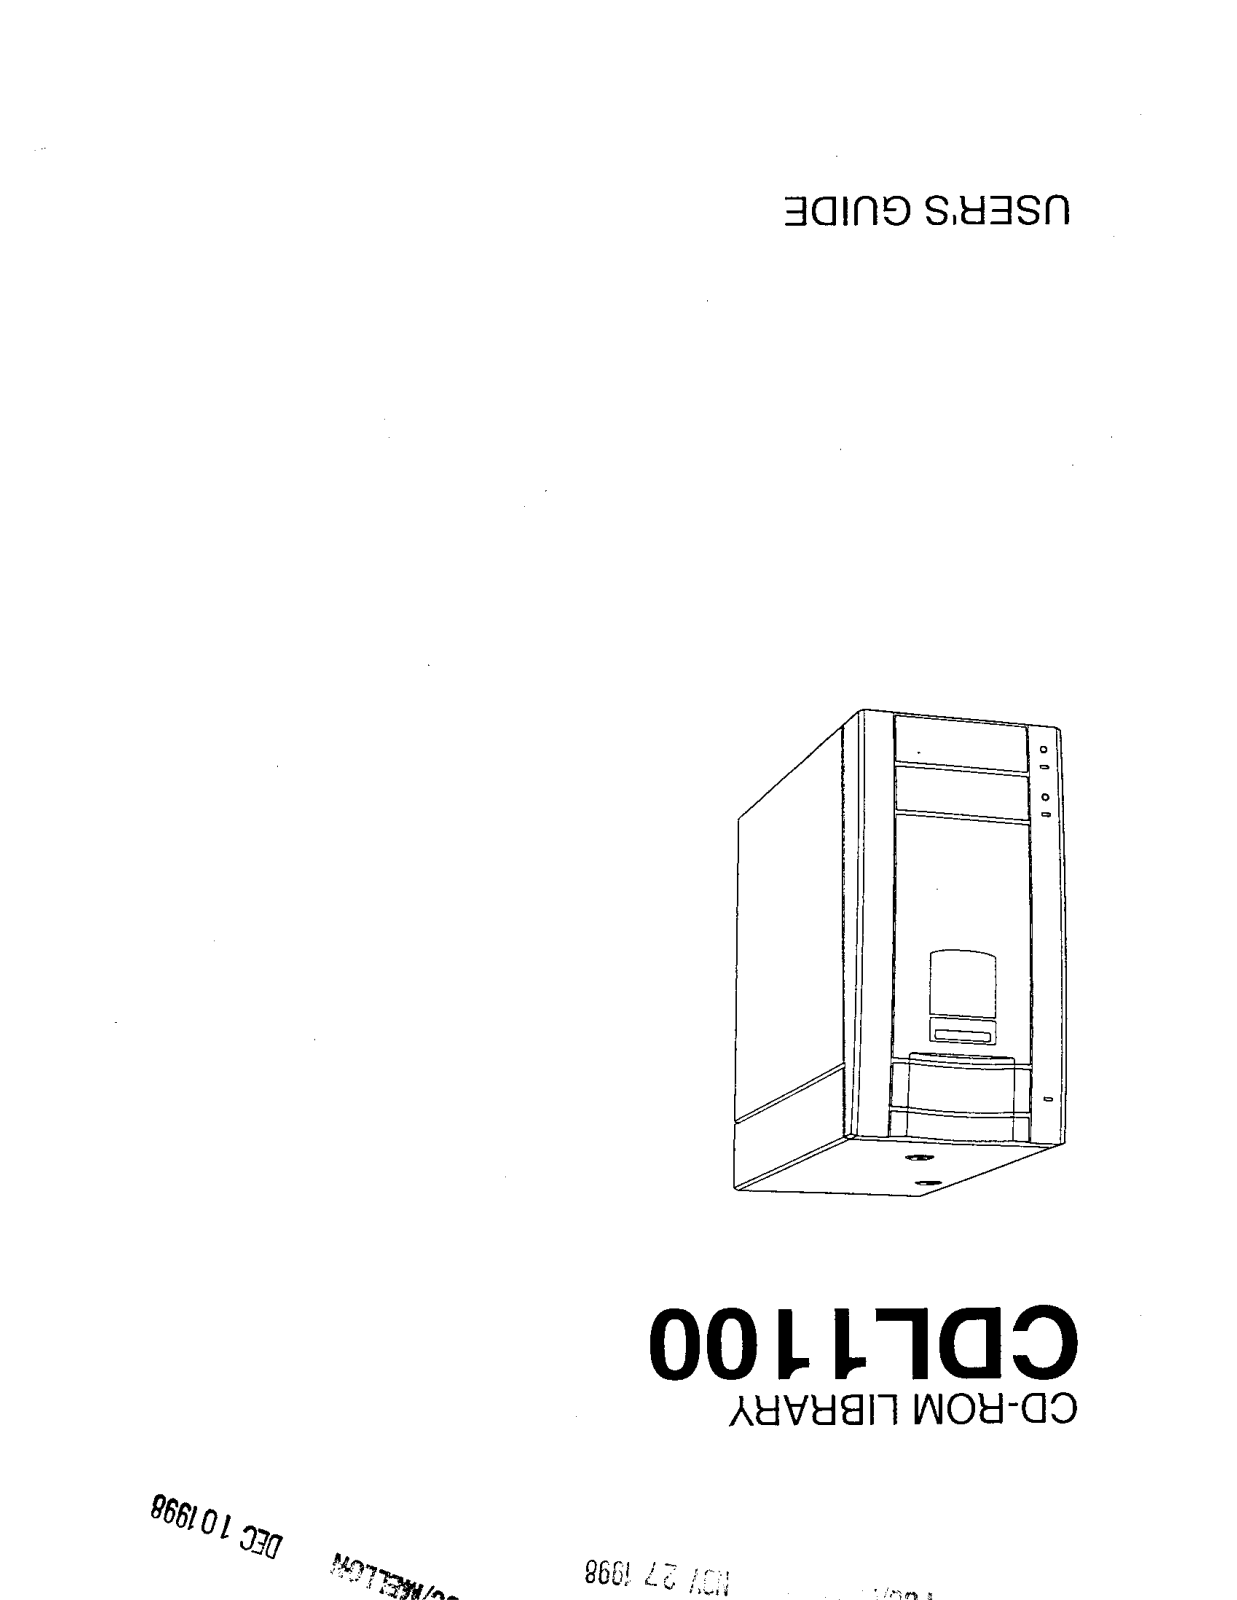 Sony CDL110040 Users Manual